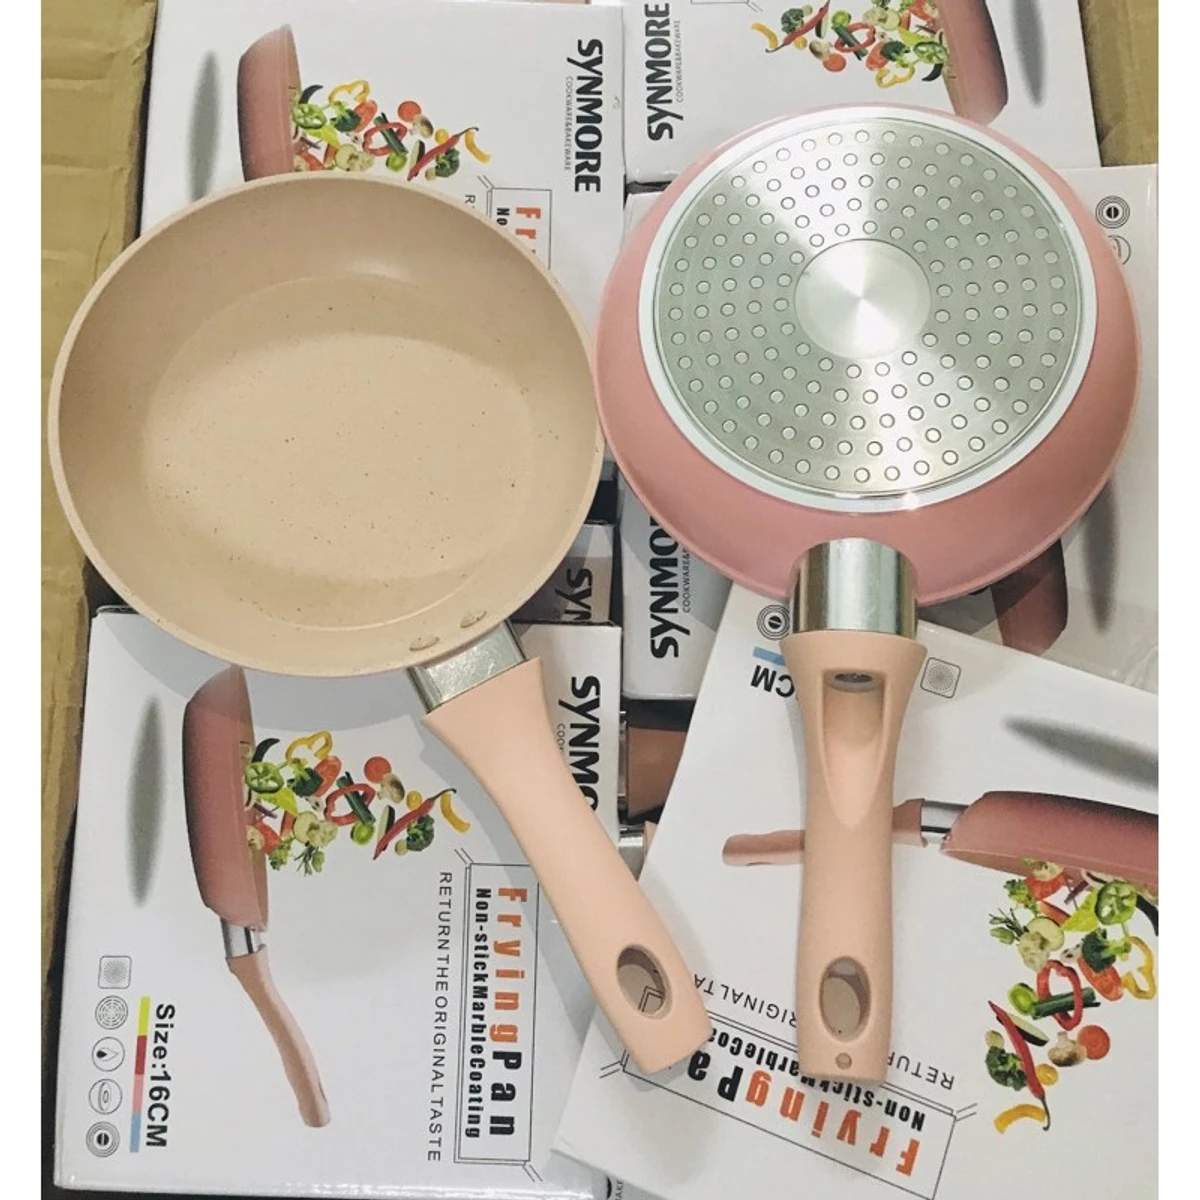 Frying Pan Non-Stick Marble Coating 16 Cm Synmore